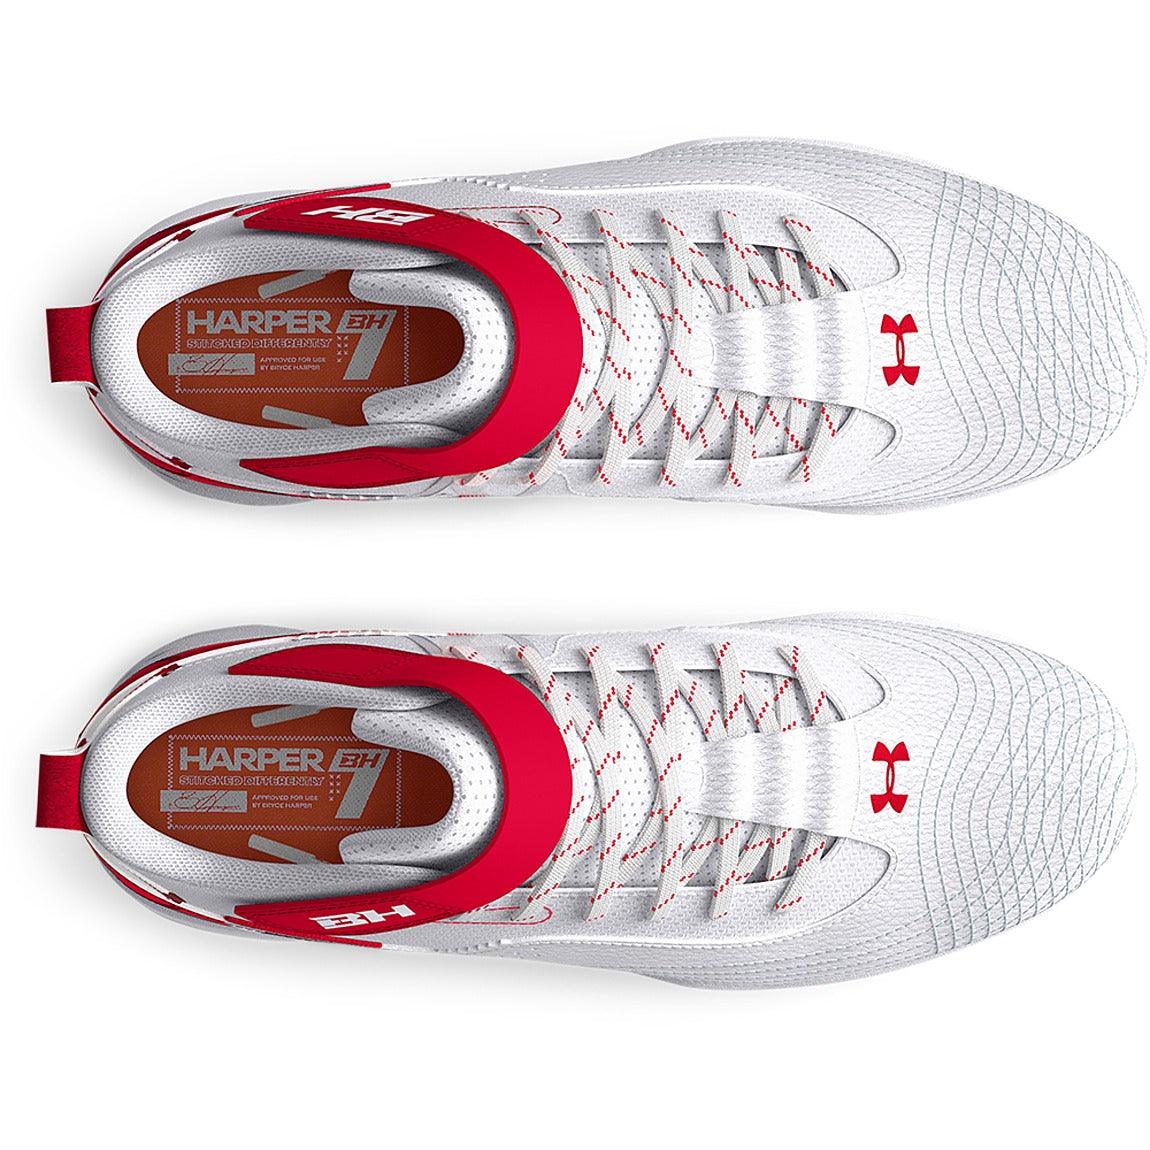 Under Armour Harper 7 Mid RM Jr. Baseball Cleats - Sports Excellence